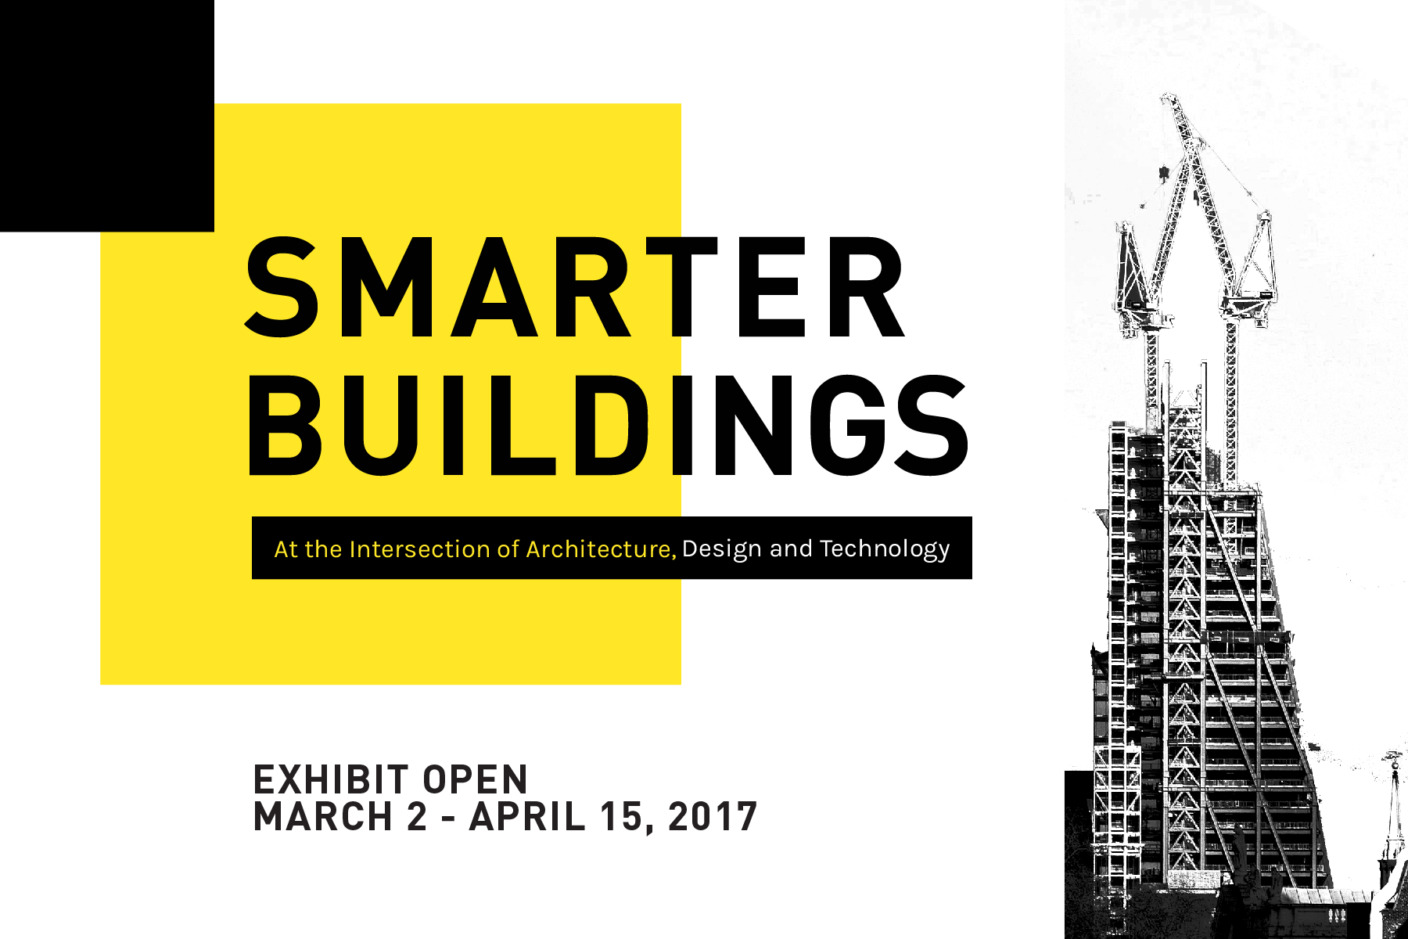 Smarter buildings use a new generation of tools that leverage today’s data-rich environments to help create more capable, sustainable structures. The exhibit investigates a range of cutting-edge technologies in building science, from environmental controls and waste water systems to unique user interfaces and advanced construction methods.